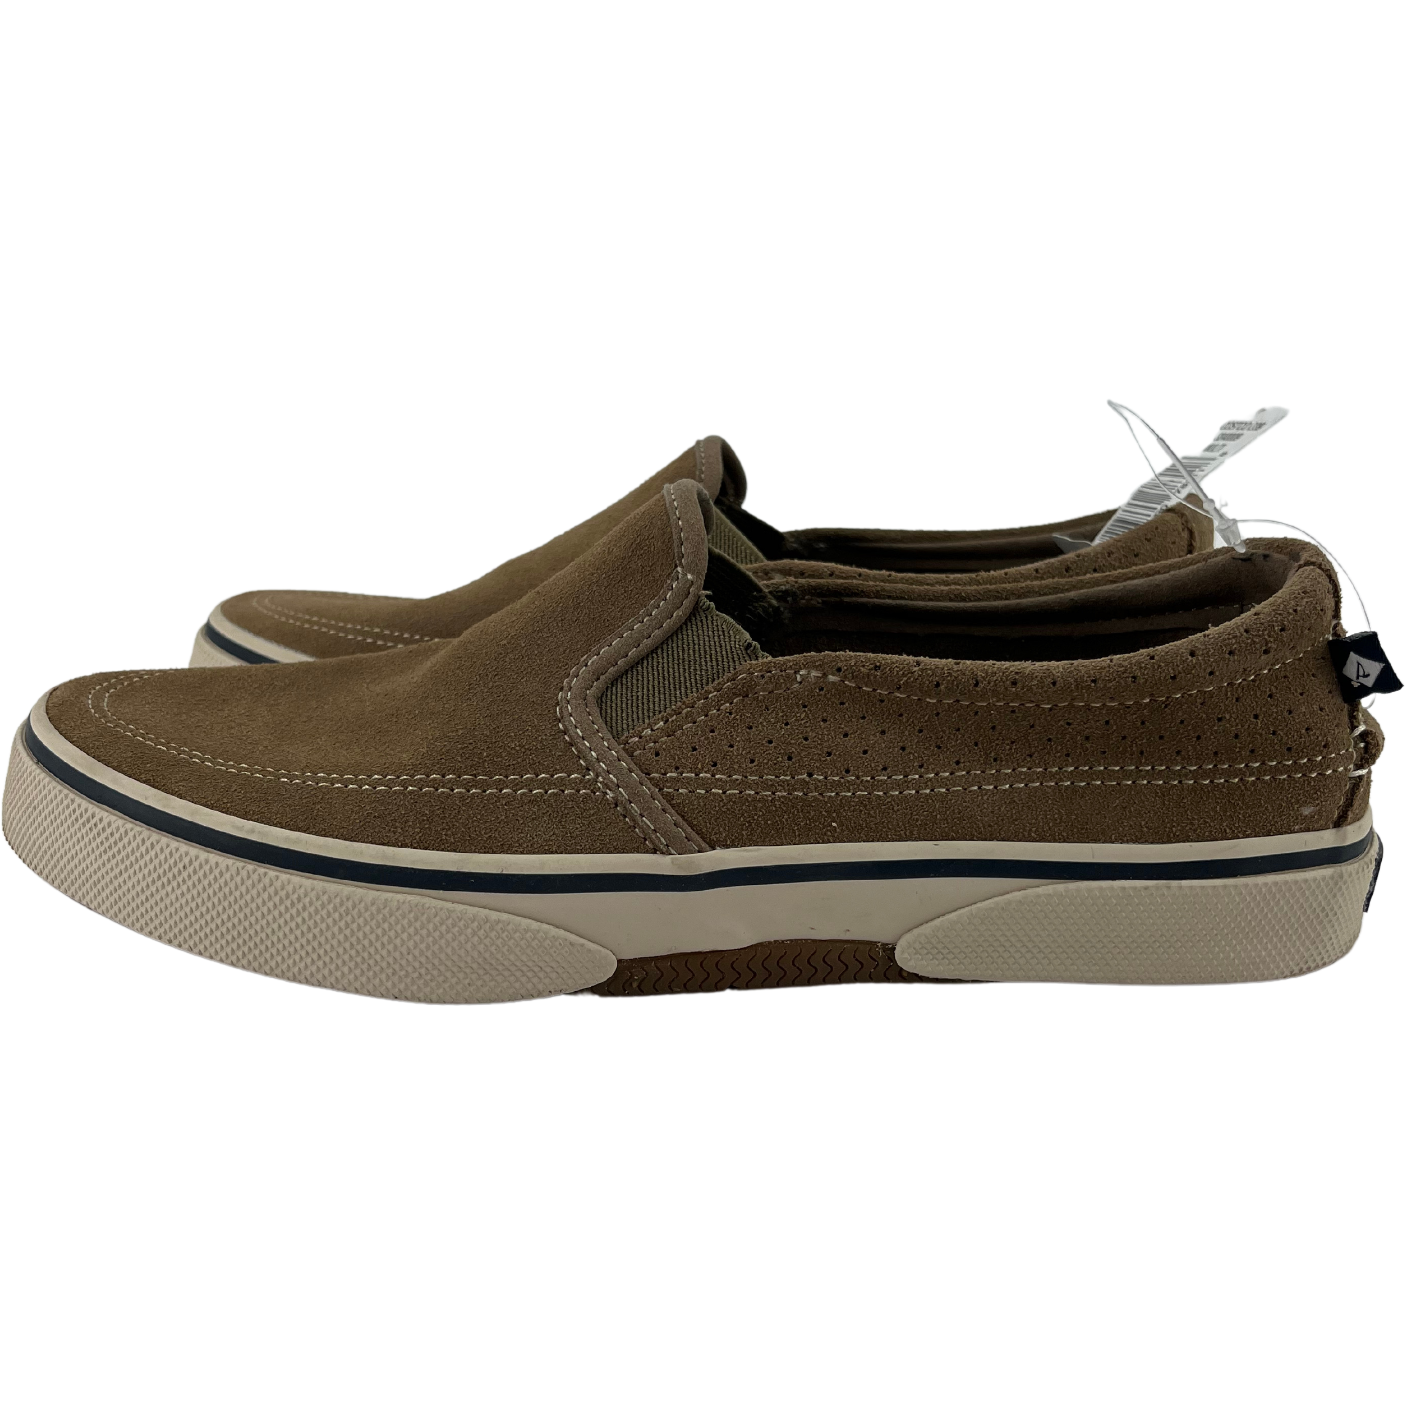 Paul Sperry Men's Shoes / Slip On Shoes / Tan / Size 9 - CanadaWide ...